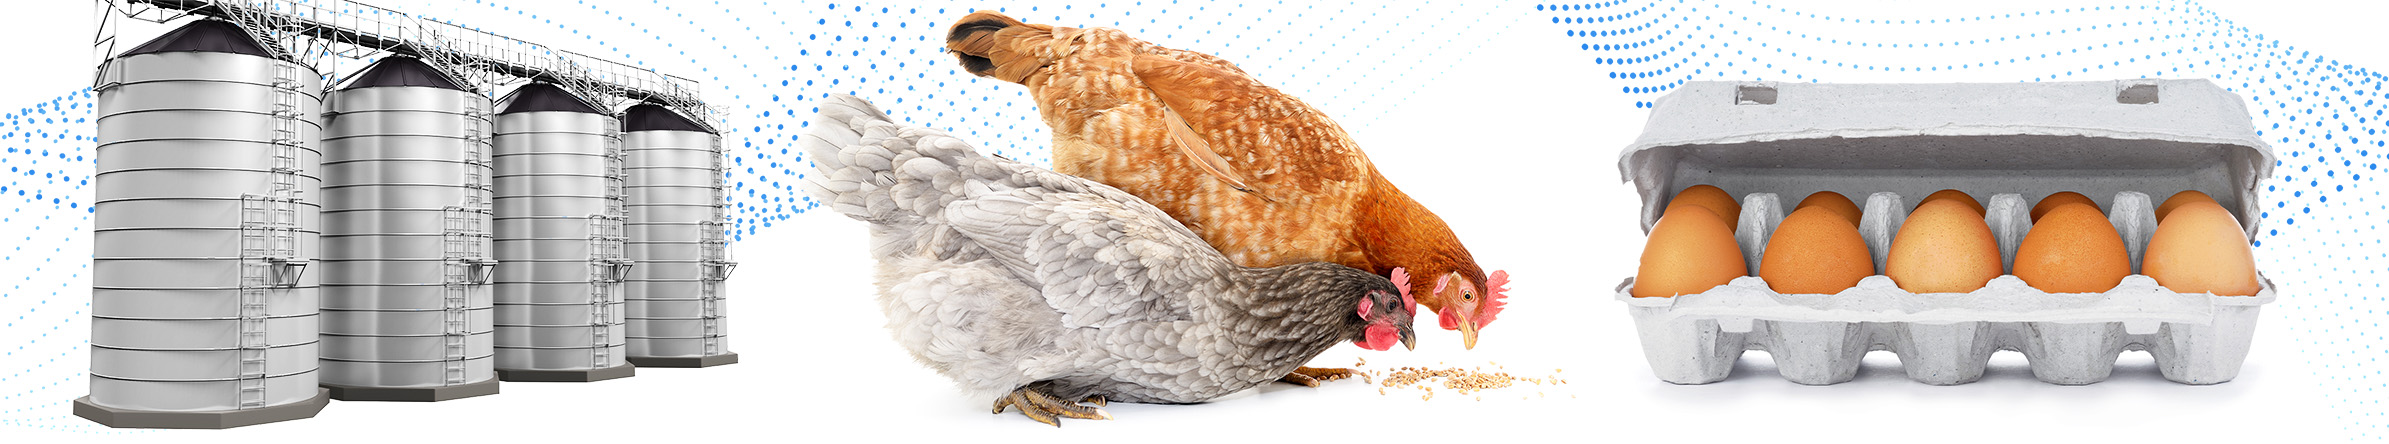 Poultry feed supply chain.jpg